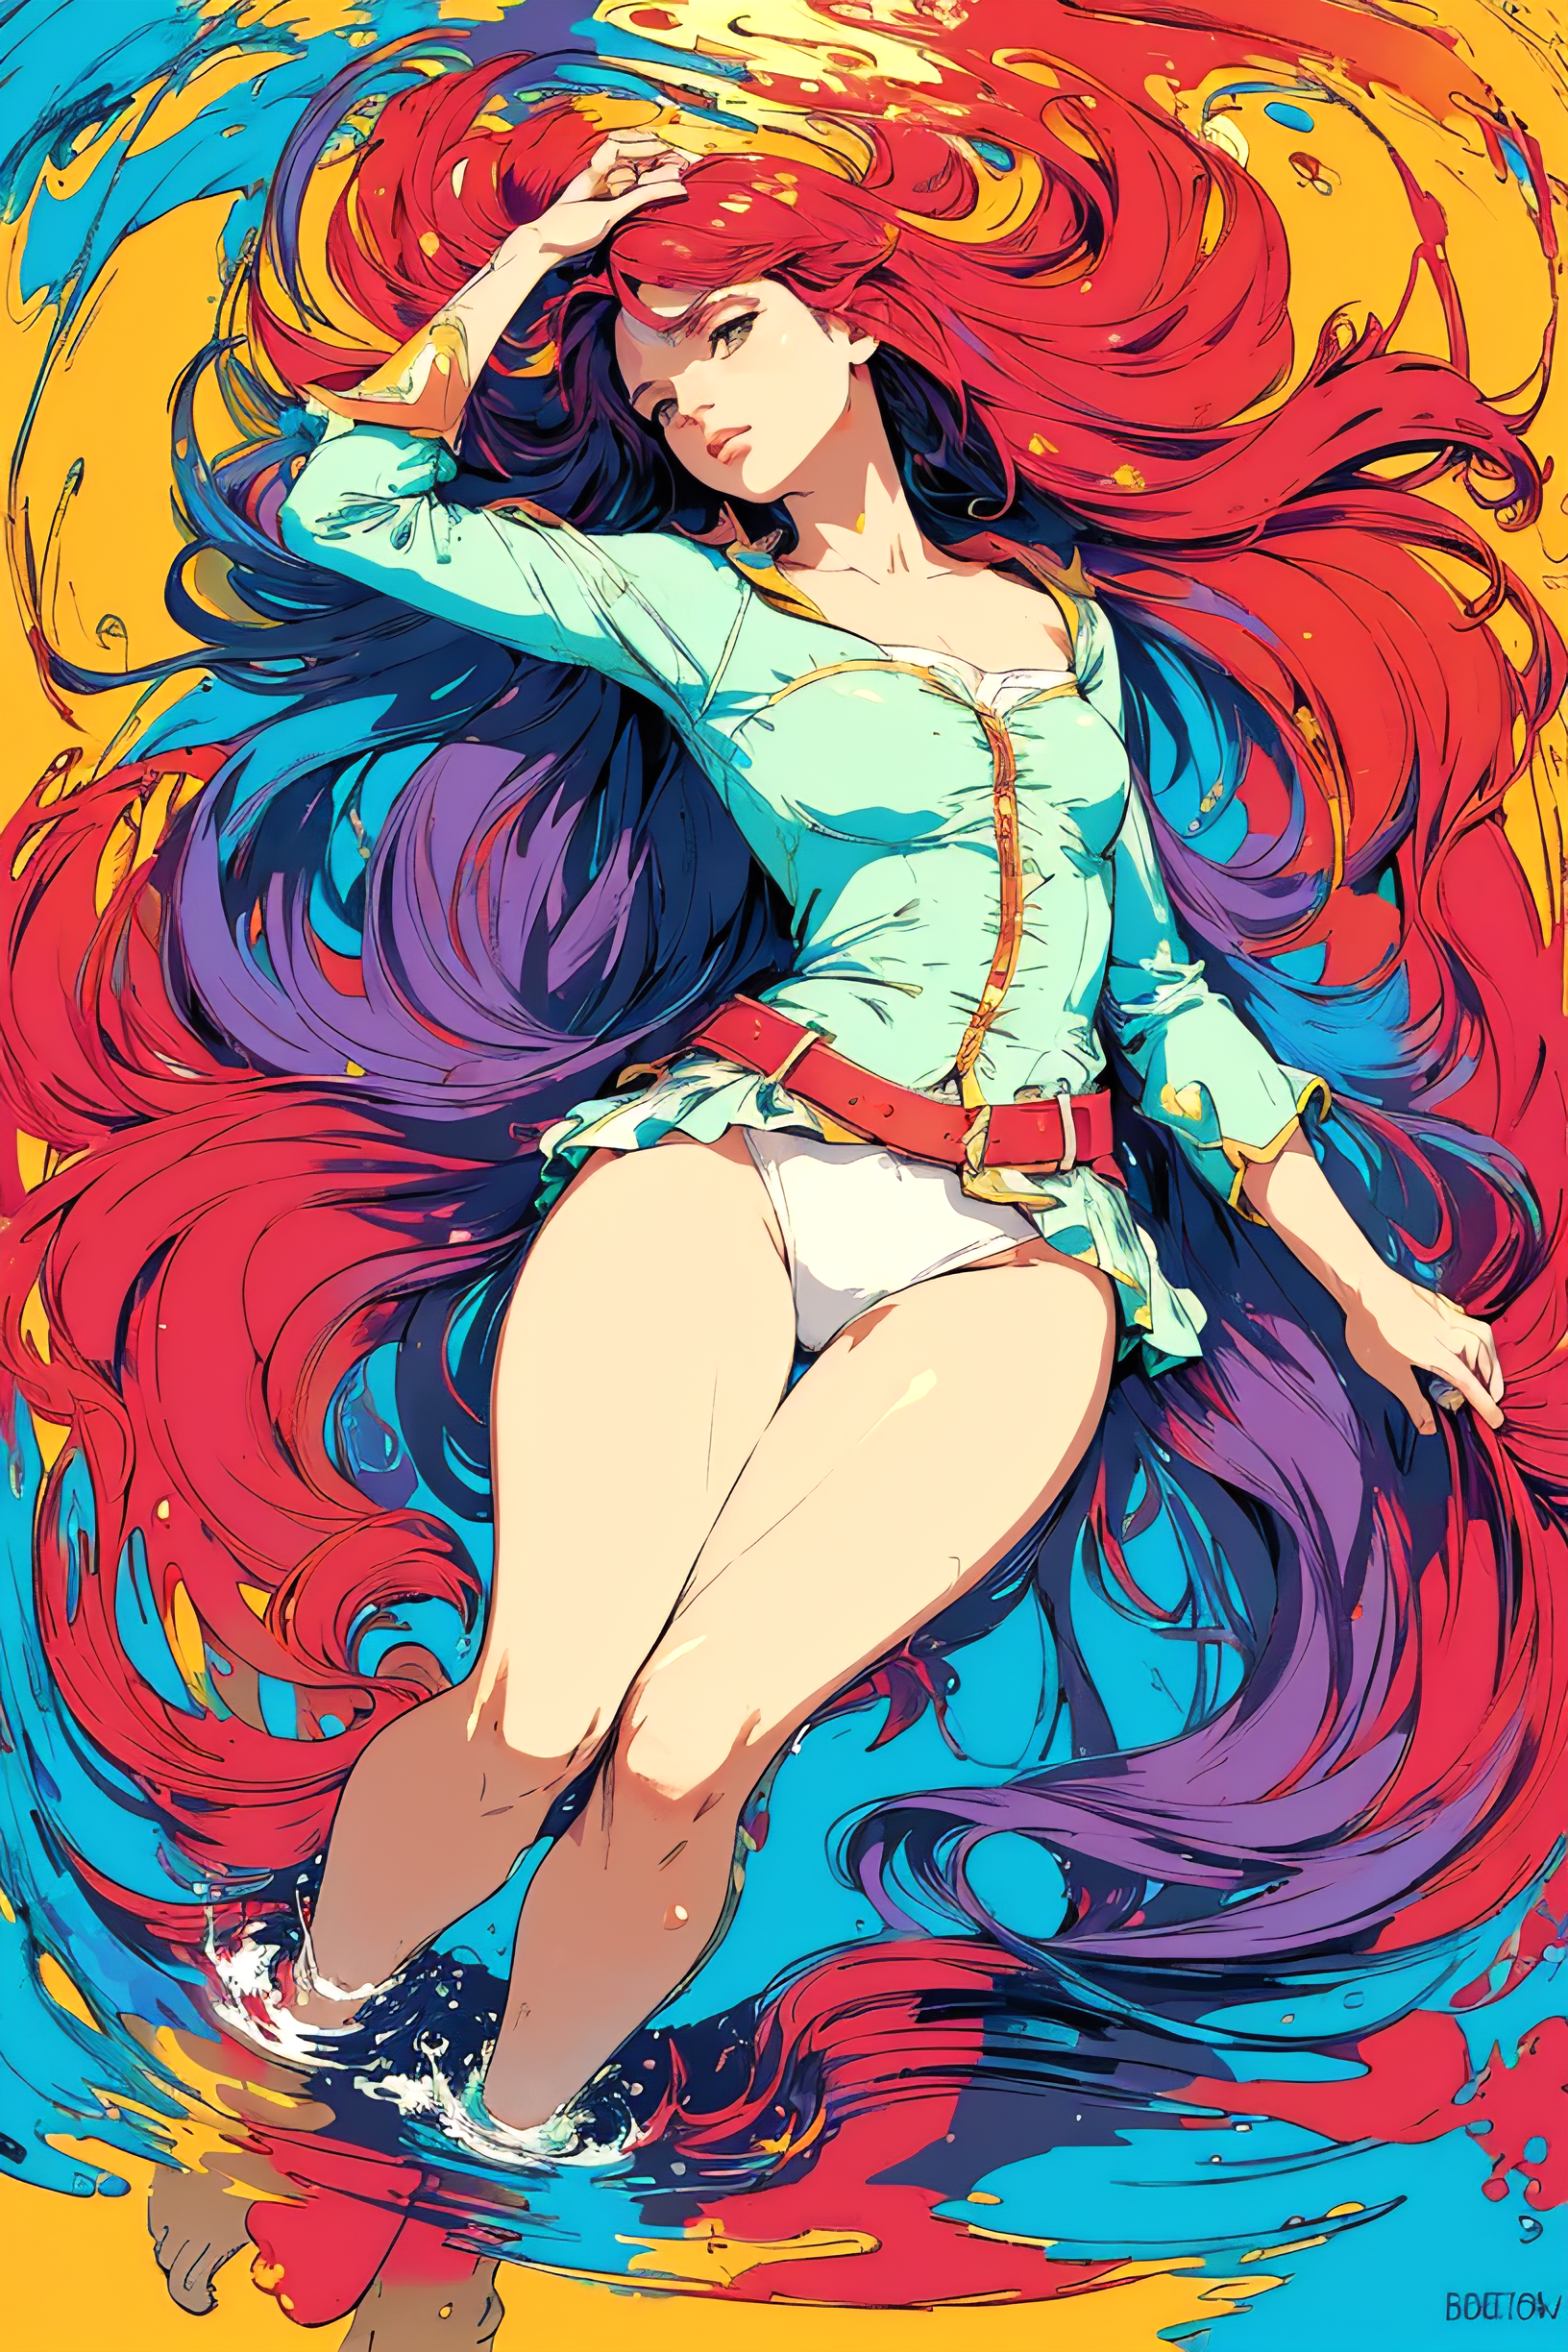 A colorful and vibrant painting of a woman laying on her back, wearing a blue shirt and white panties, with her hair flowing down her back. The painting is set against a brightly colored background.